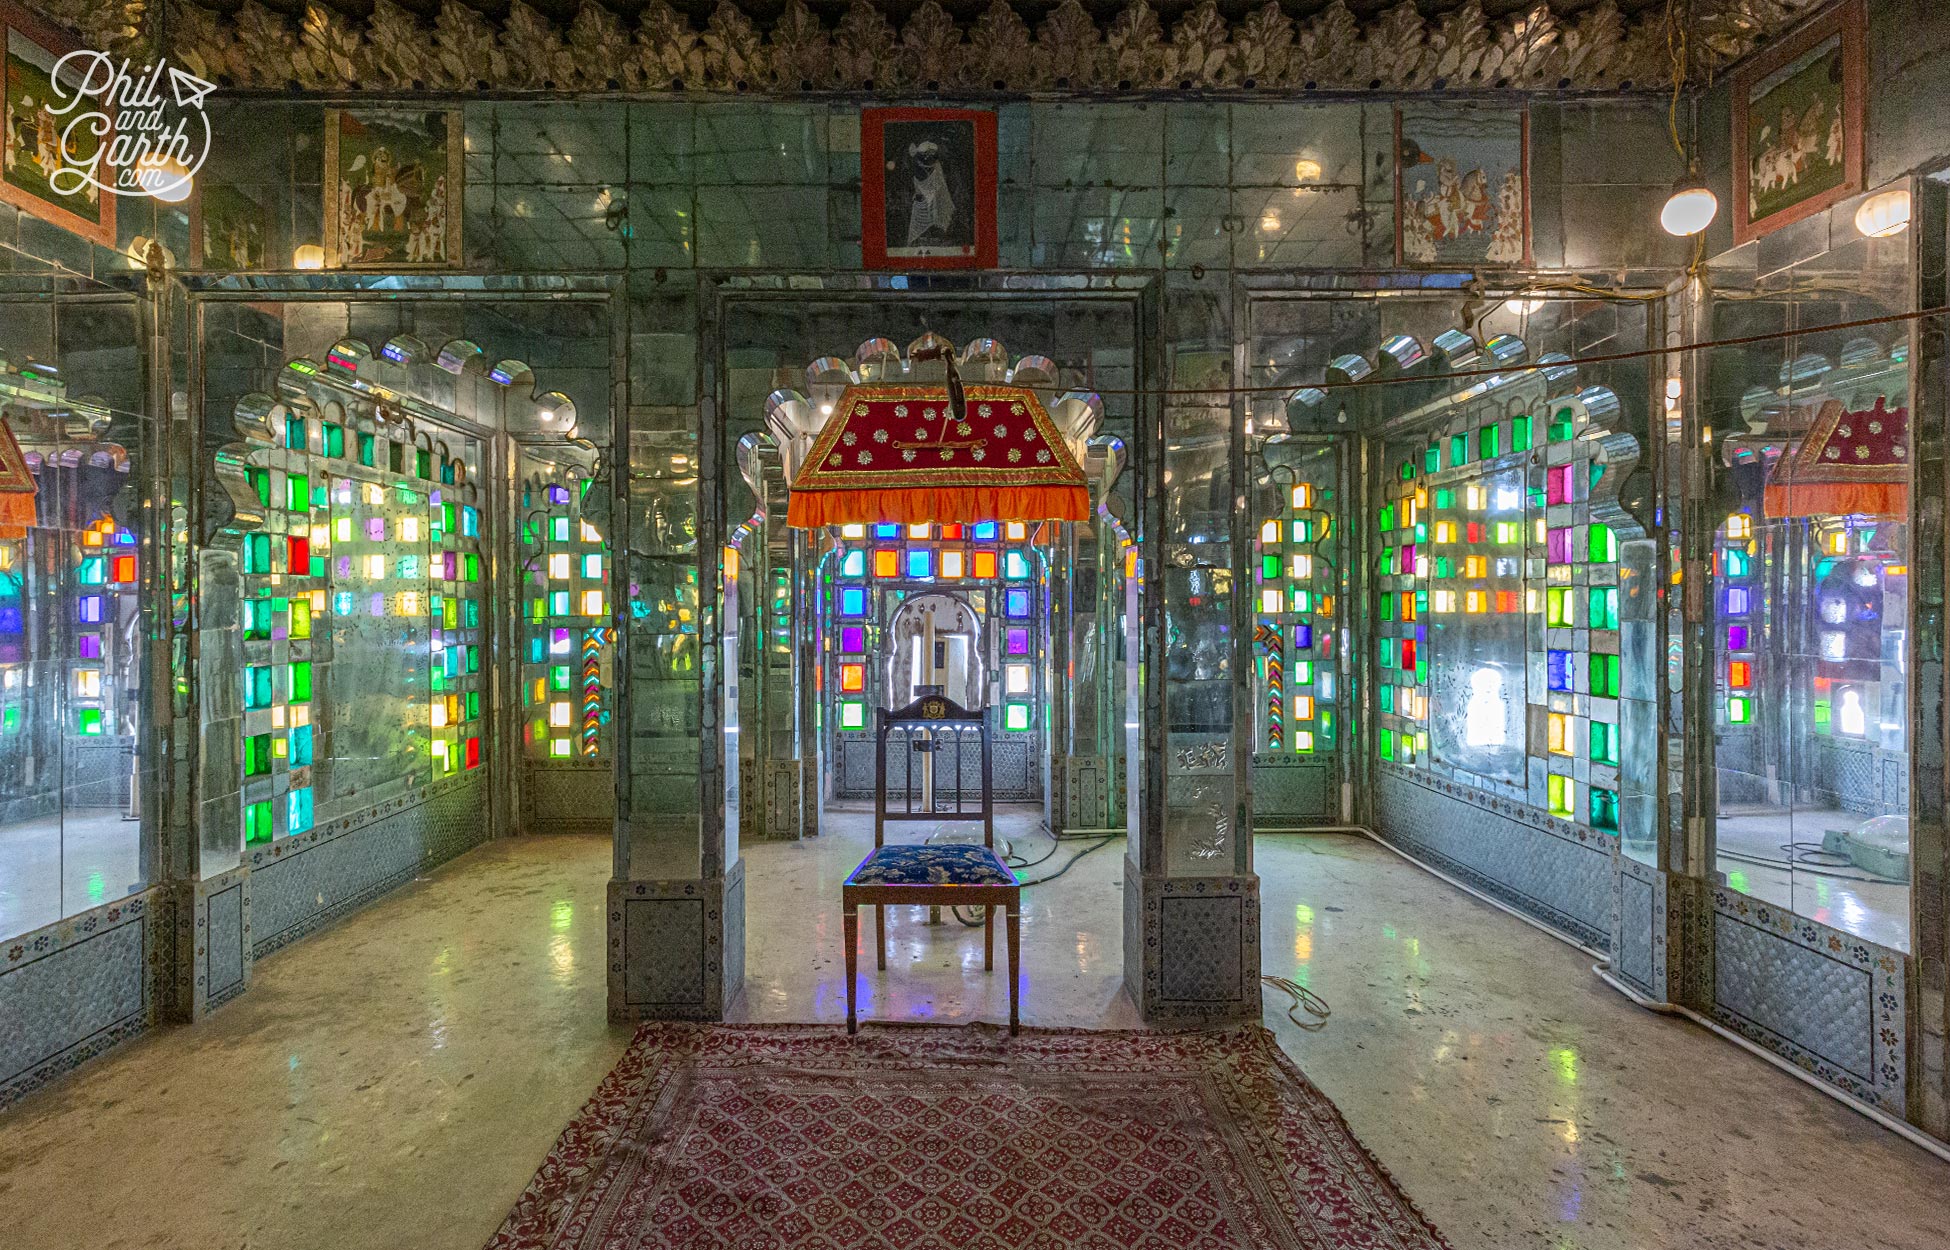 Manak Mahal (The Ruby Palace) The light in this room from the coloured stained glass and mirrored walls is stunning